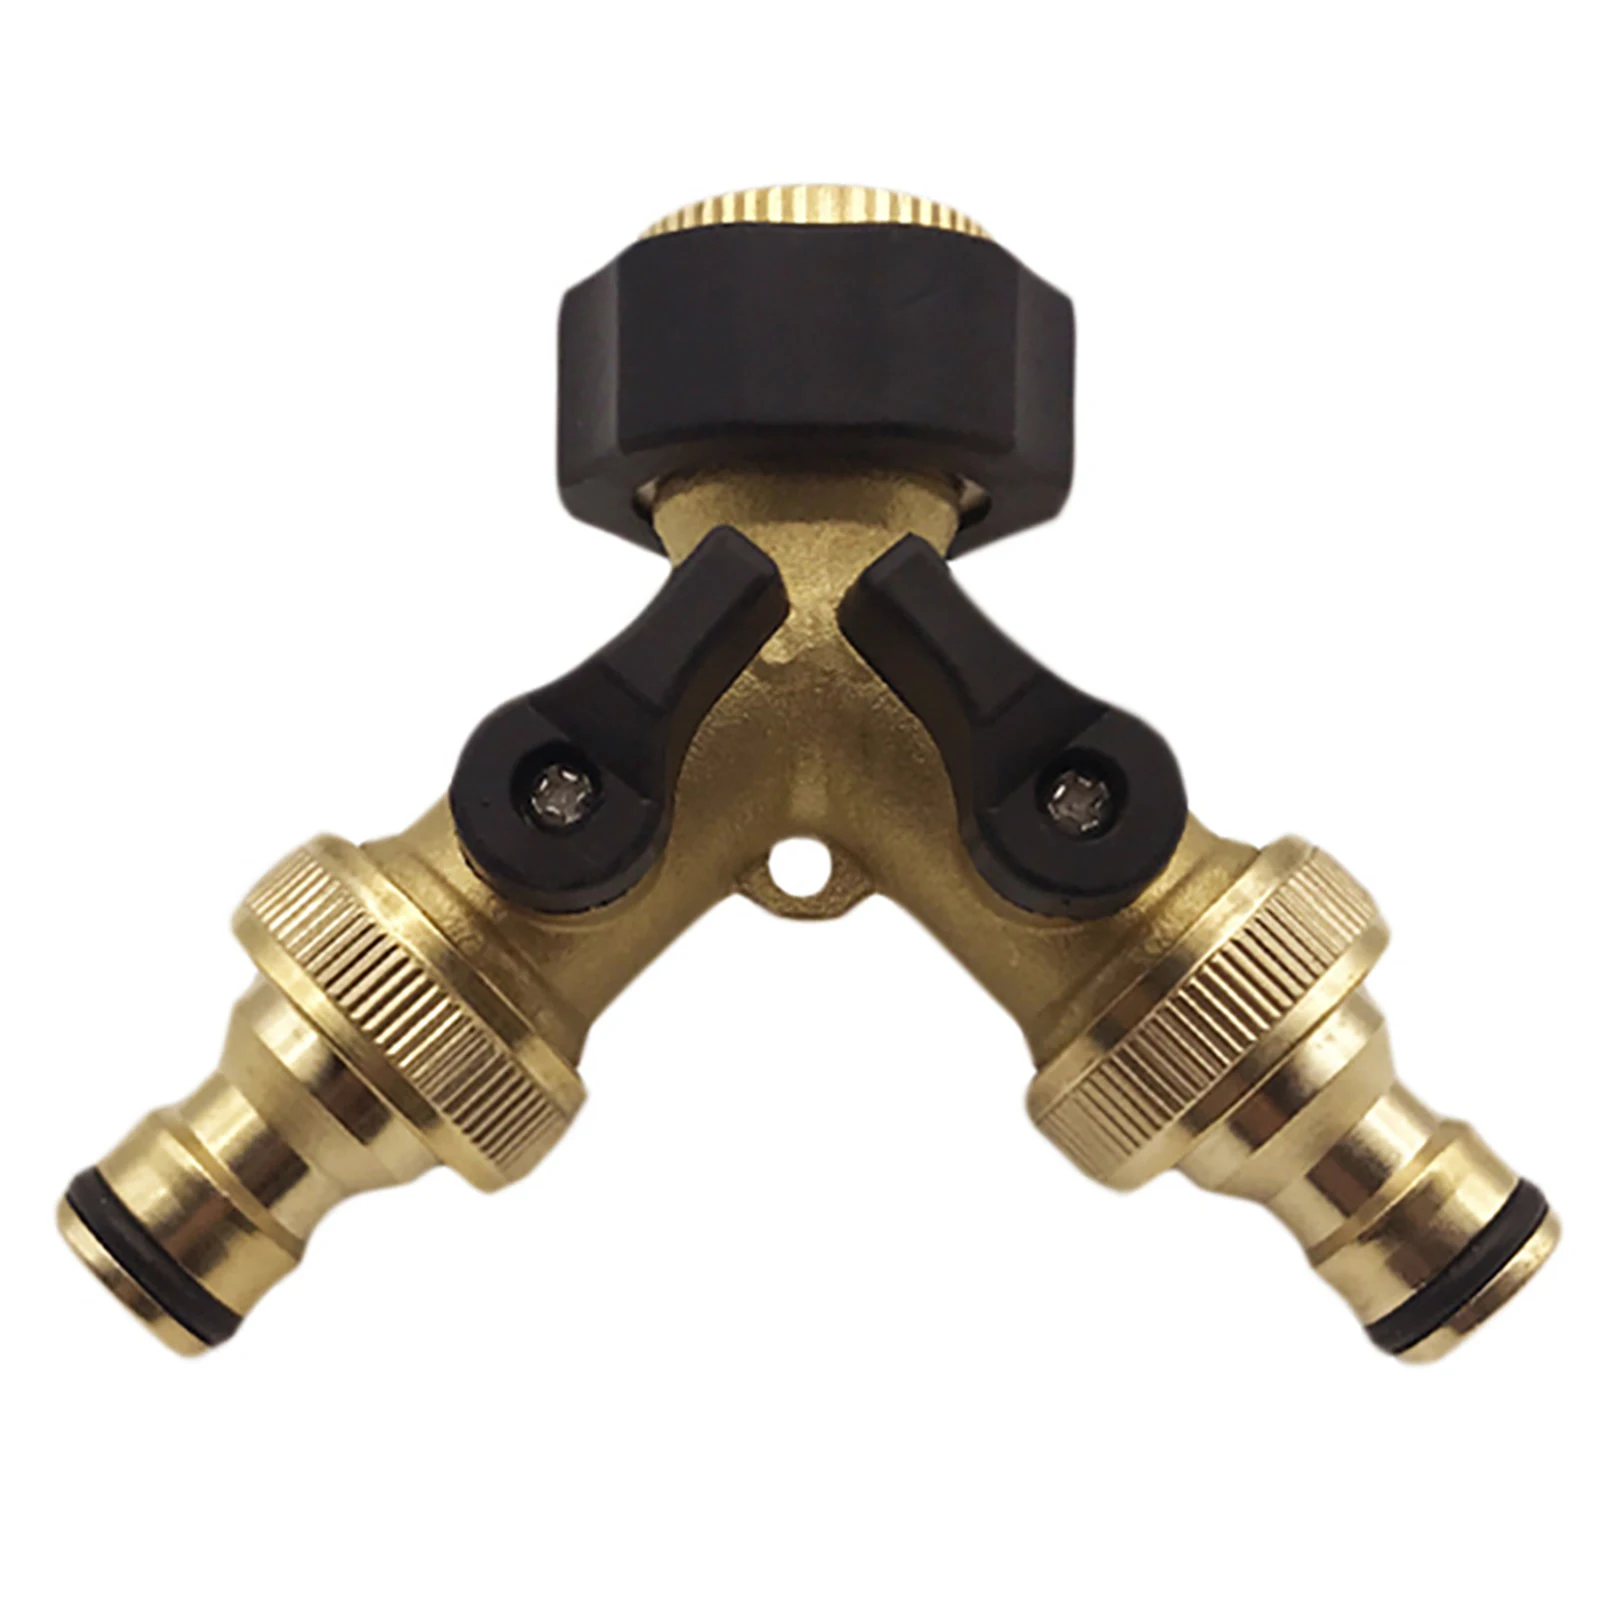 

Heavy Duty Brass Leakproof Hose Splitter Outdoor Agricultural 2 Way With Adapters Car Wash Washing Machine Home Kitchen Manifold